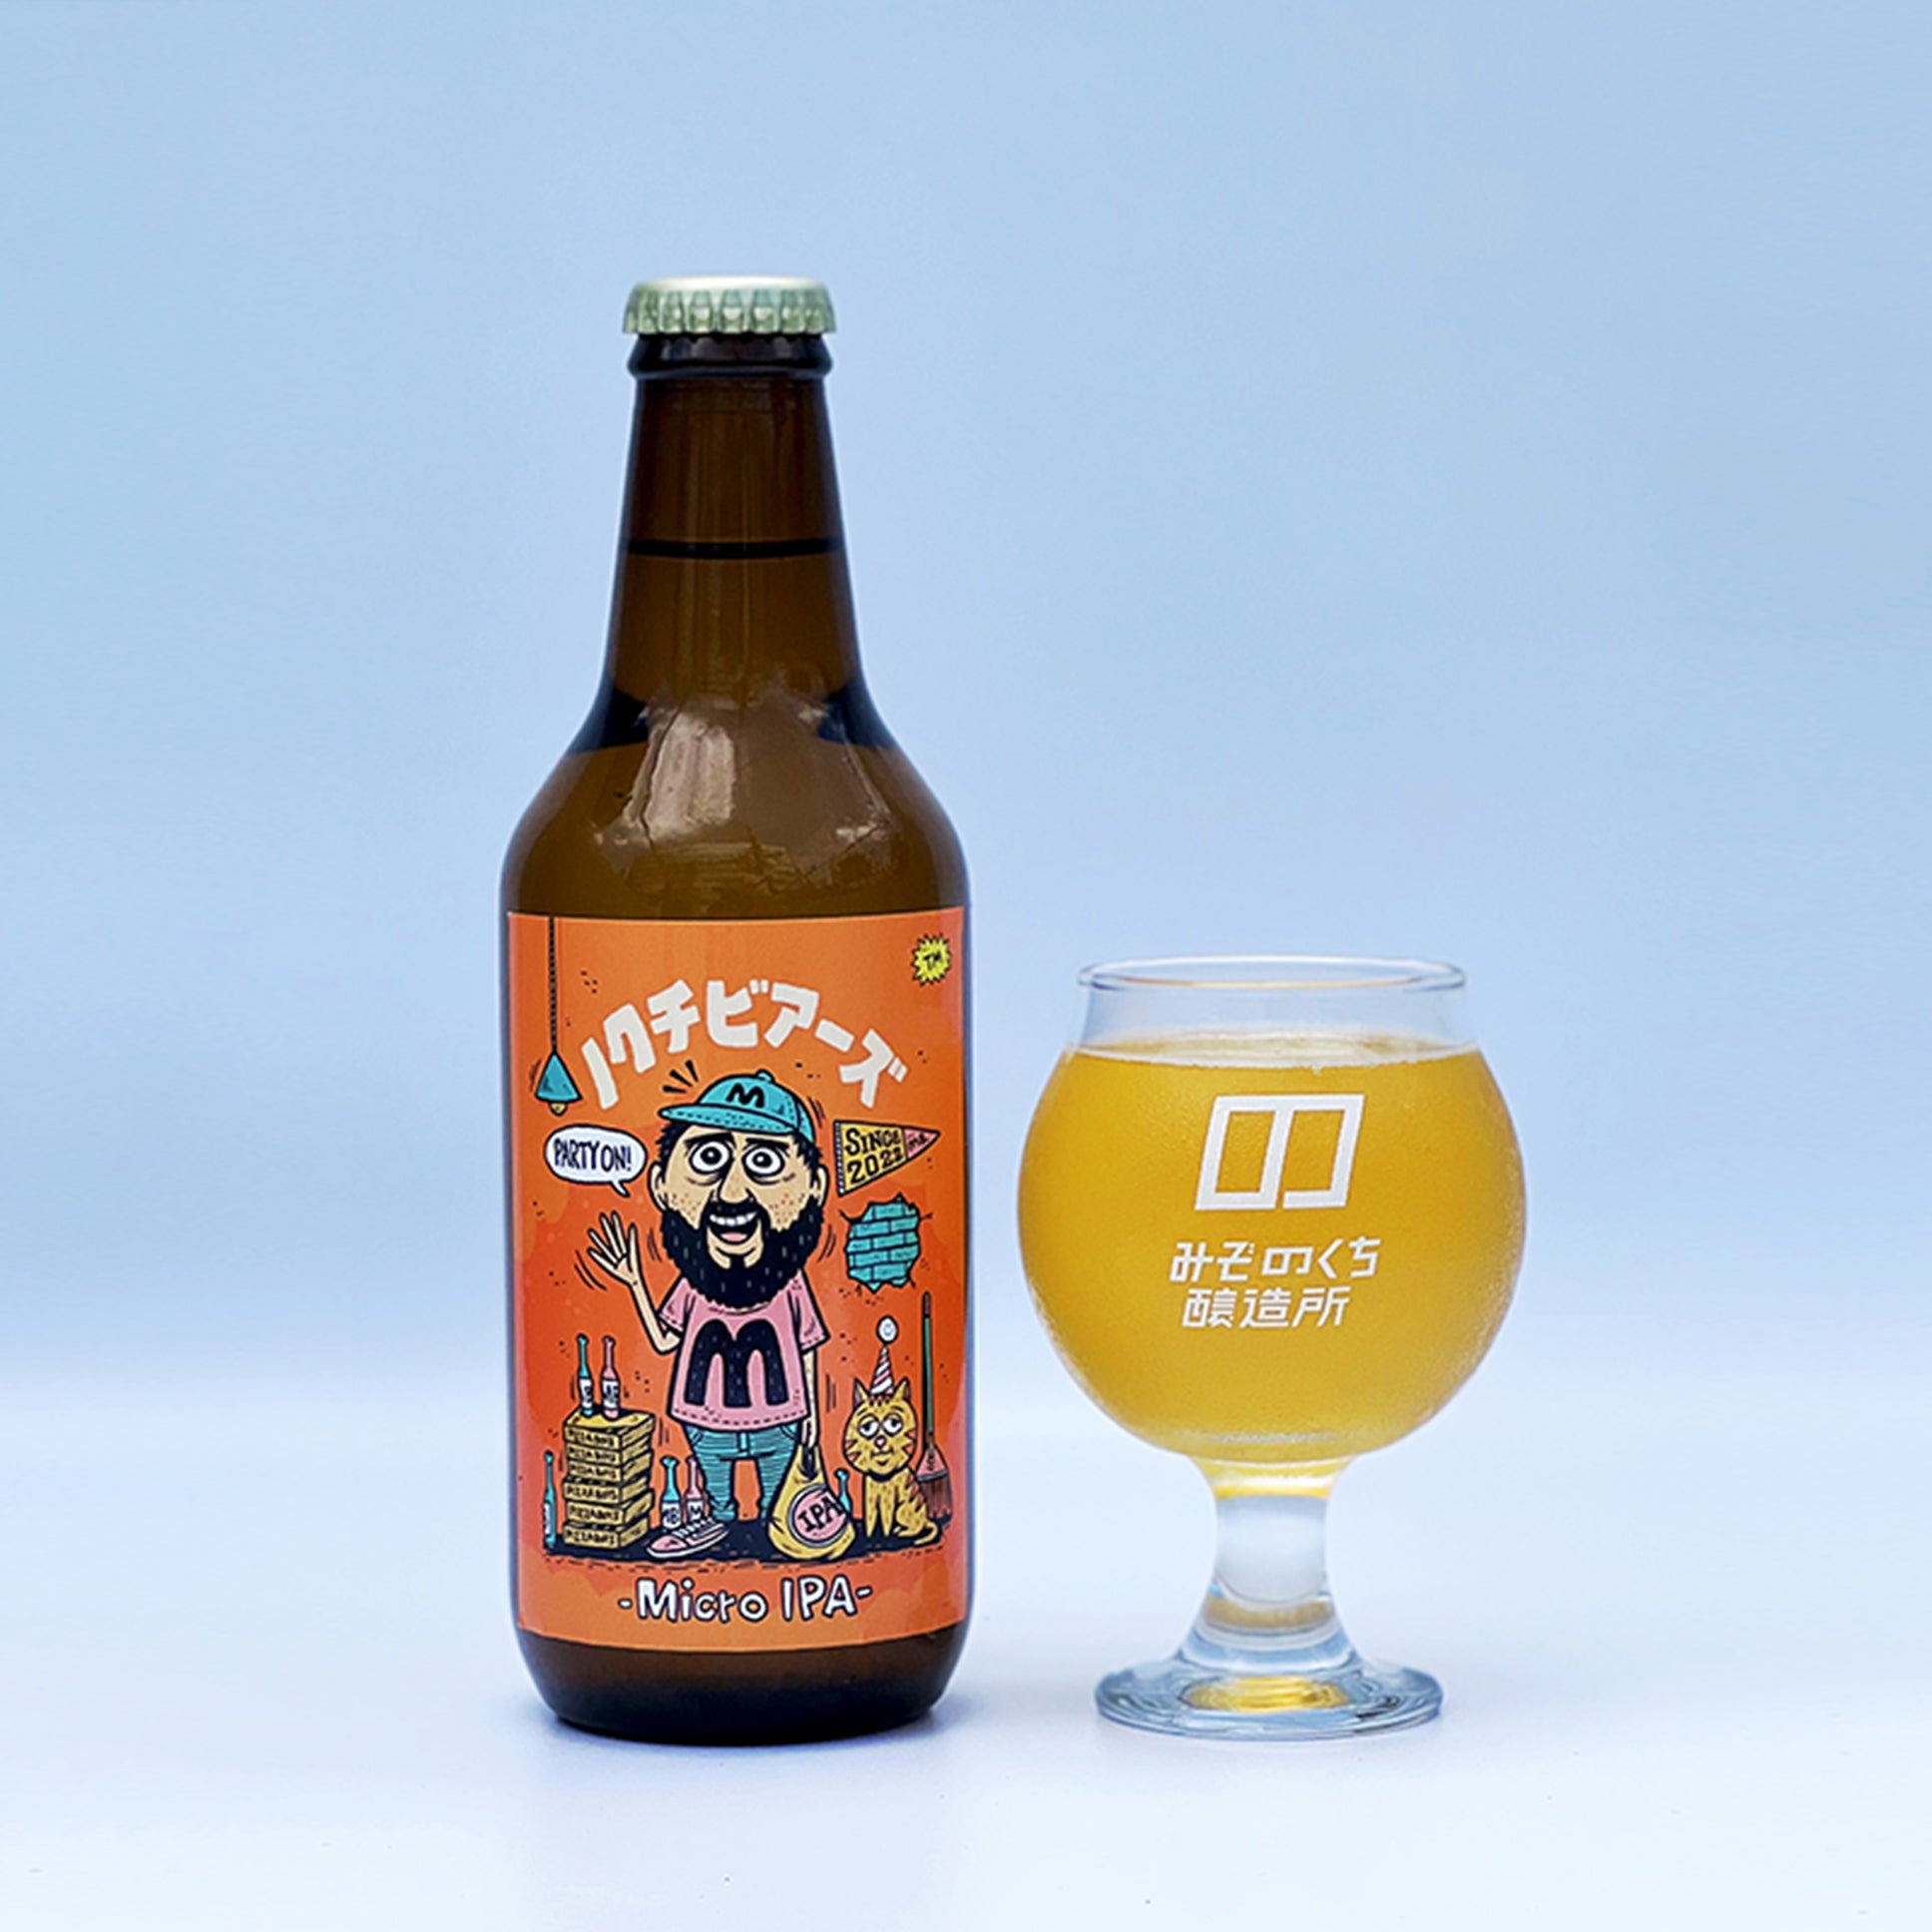 PARTY ON -Micro IPA 3本セット